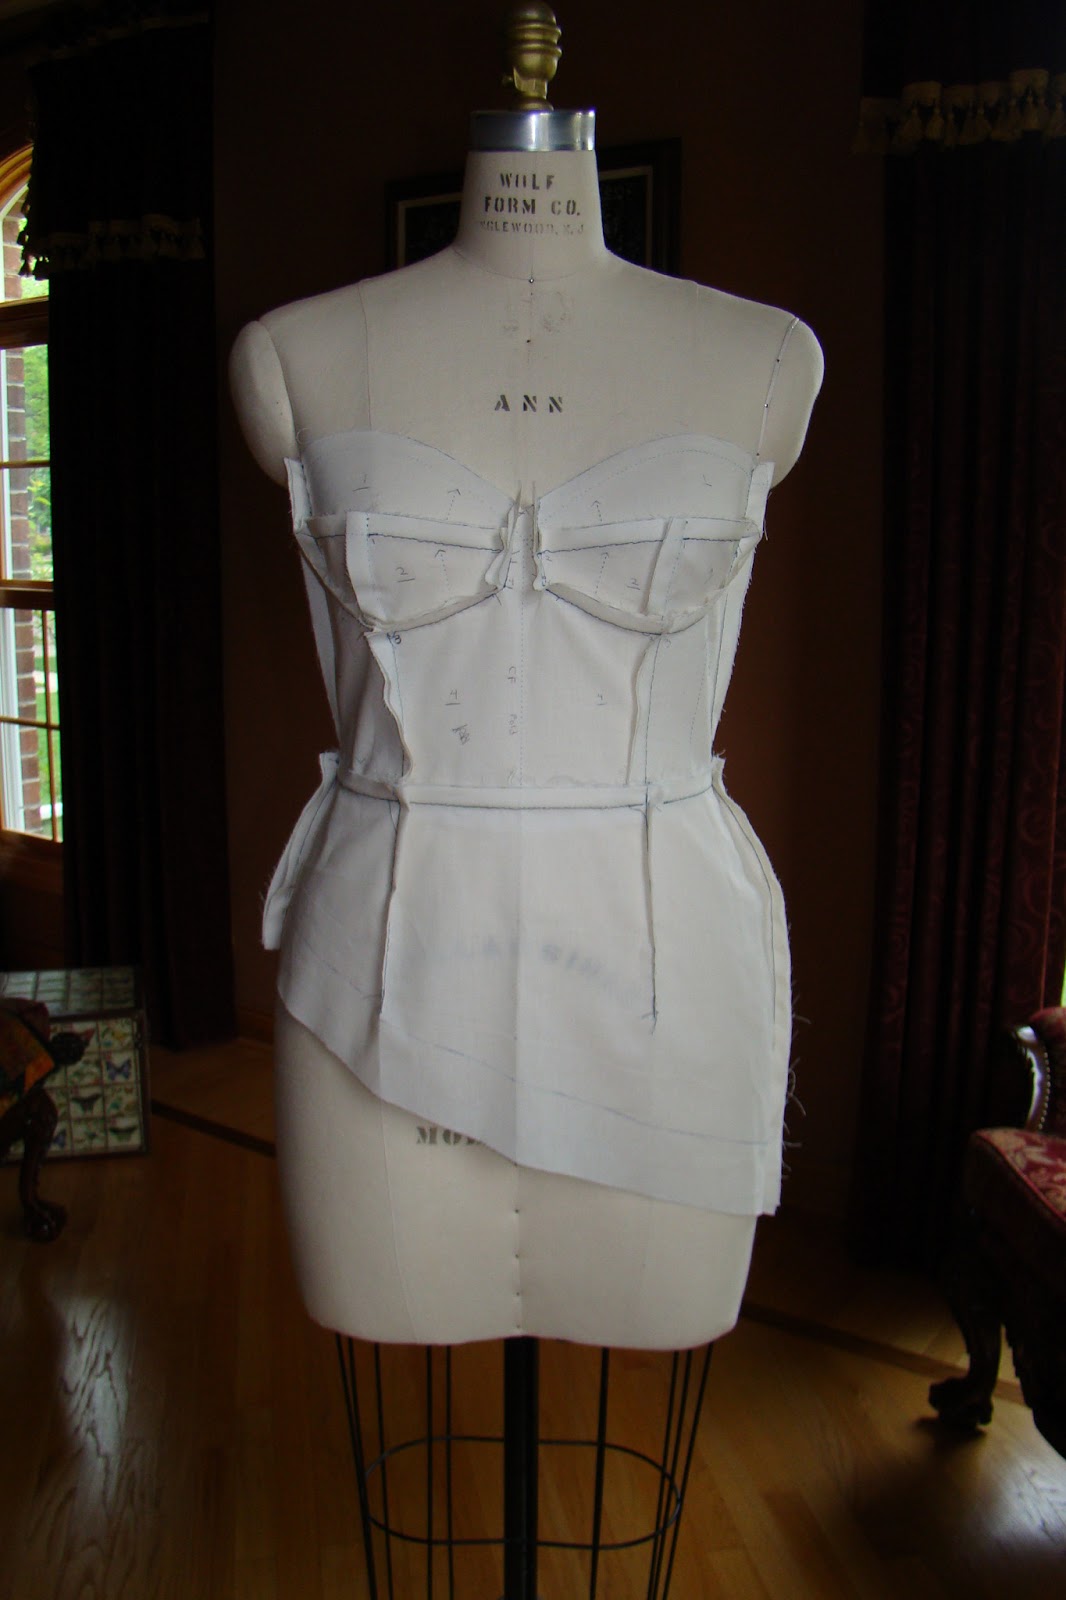 Did You Really Sew That?: Dior Spring Dress Part 2